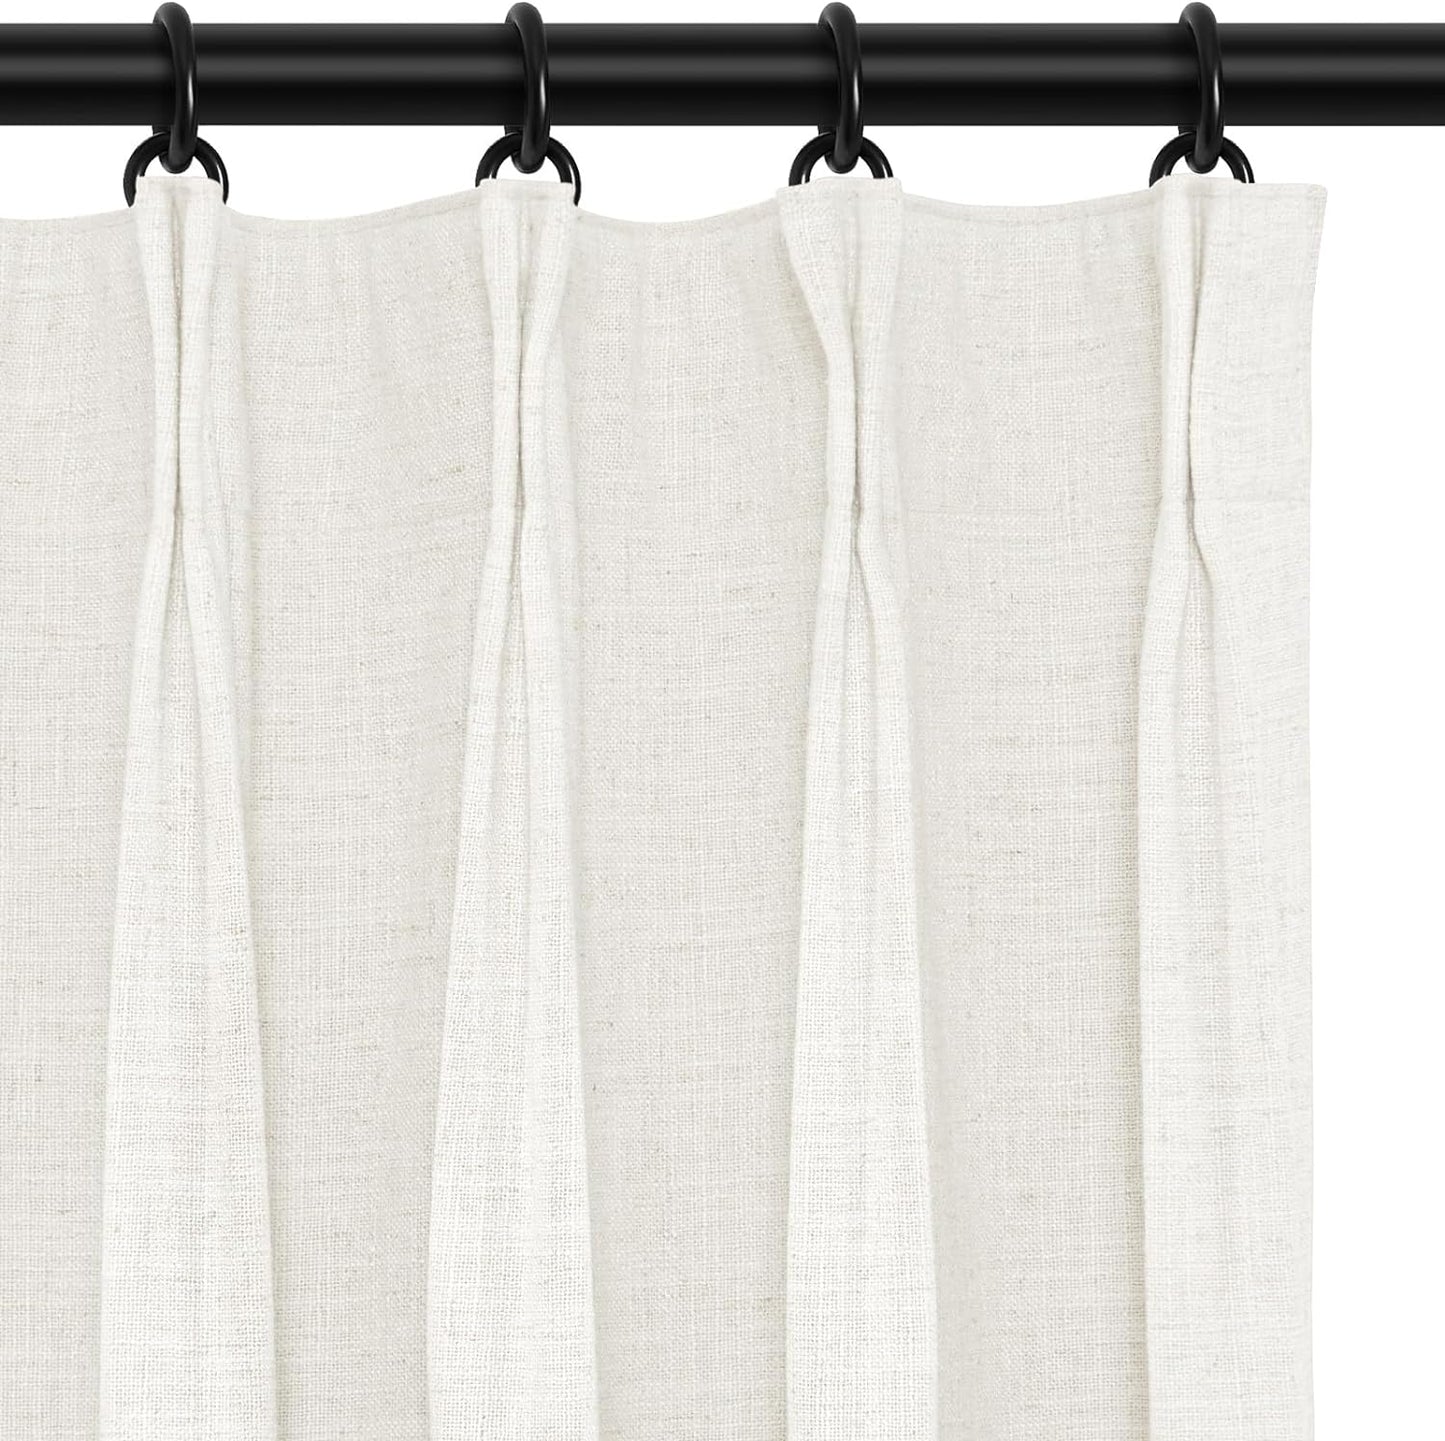 INOVADAY 100% Blackout Curtains for Bedroom, Pinch Pleated Linen Blackout Curtains 96 Inch Length 2 Panels Set, Thermal Room Darkening Linen Curtain Drapes for Living Room, W40 X L96,Beige White  INOVADAY Ivory 40"W X 84"L-2 Panels 